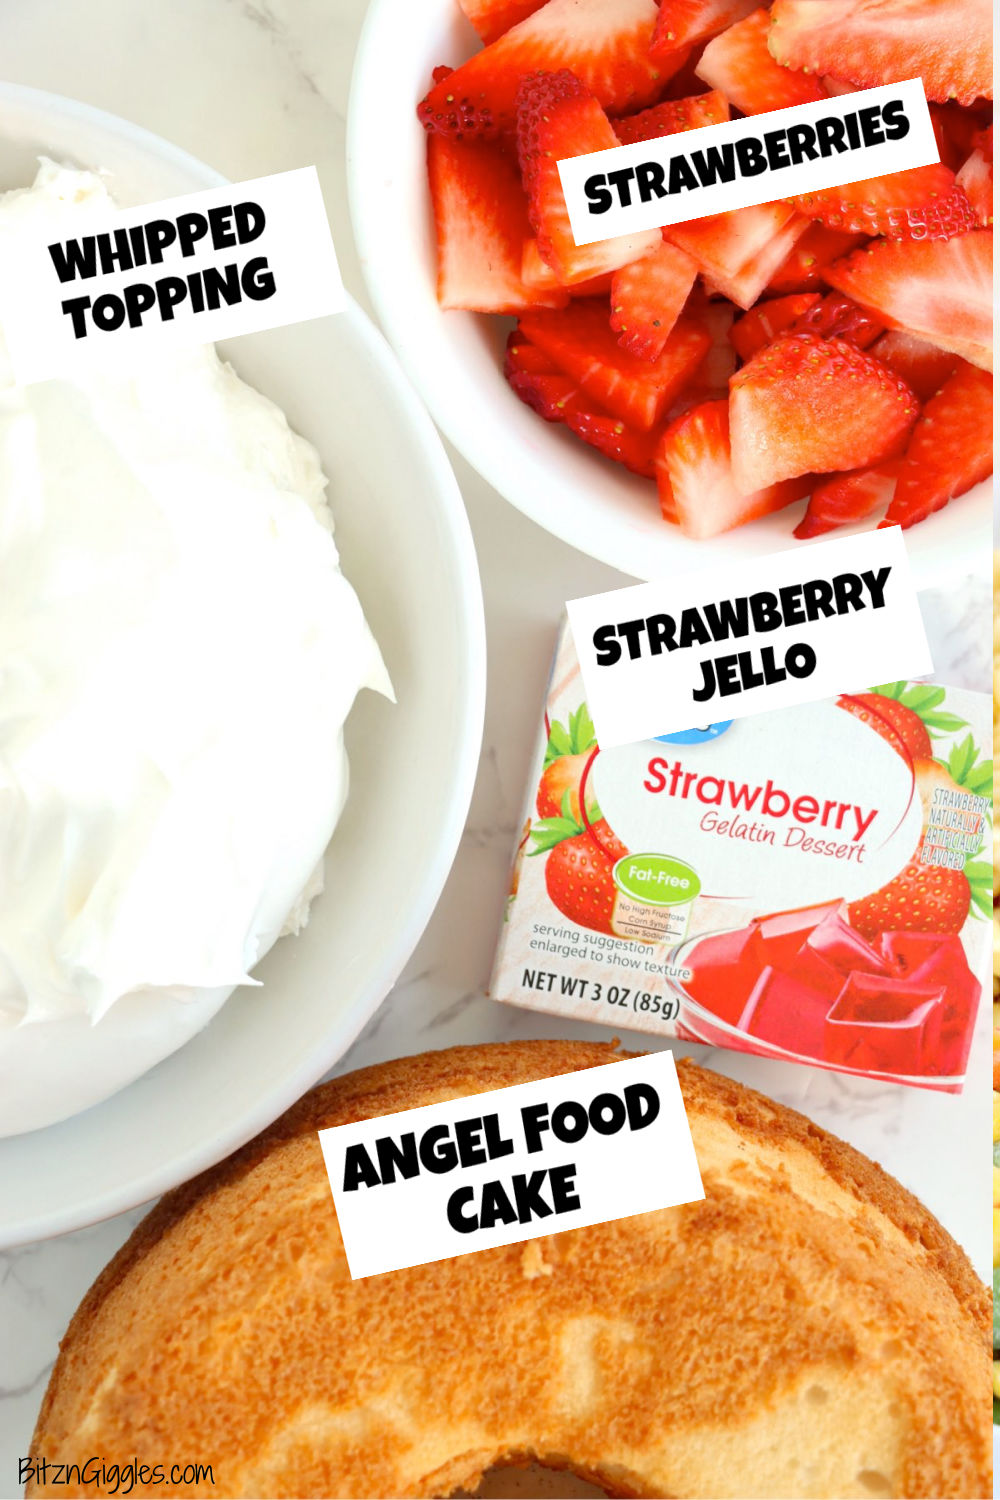 ingredients for making a no-bake strawberry dessert